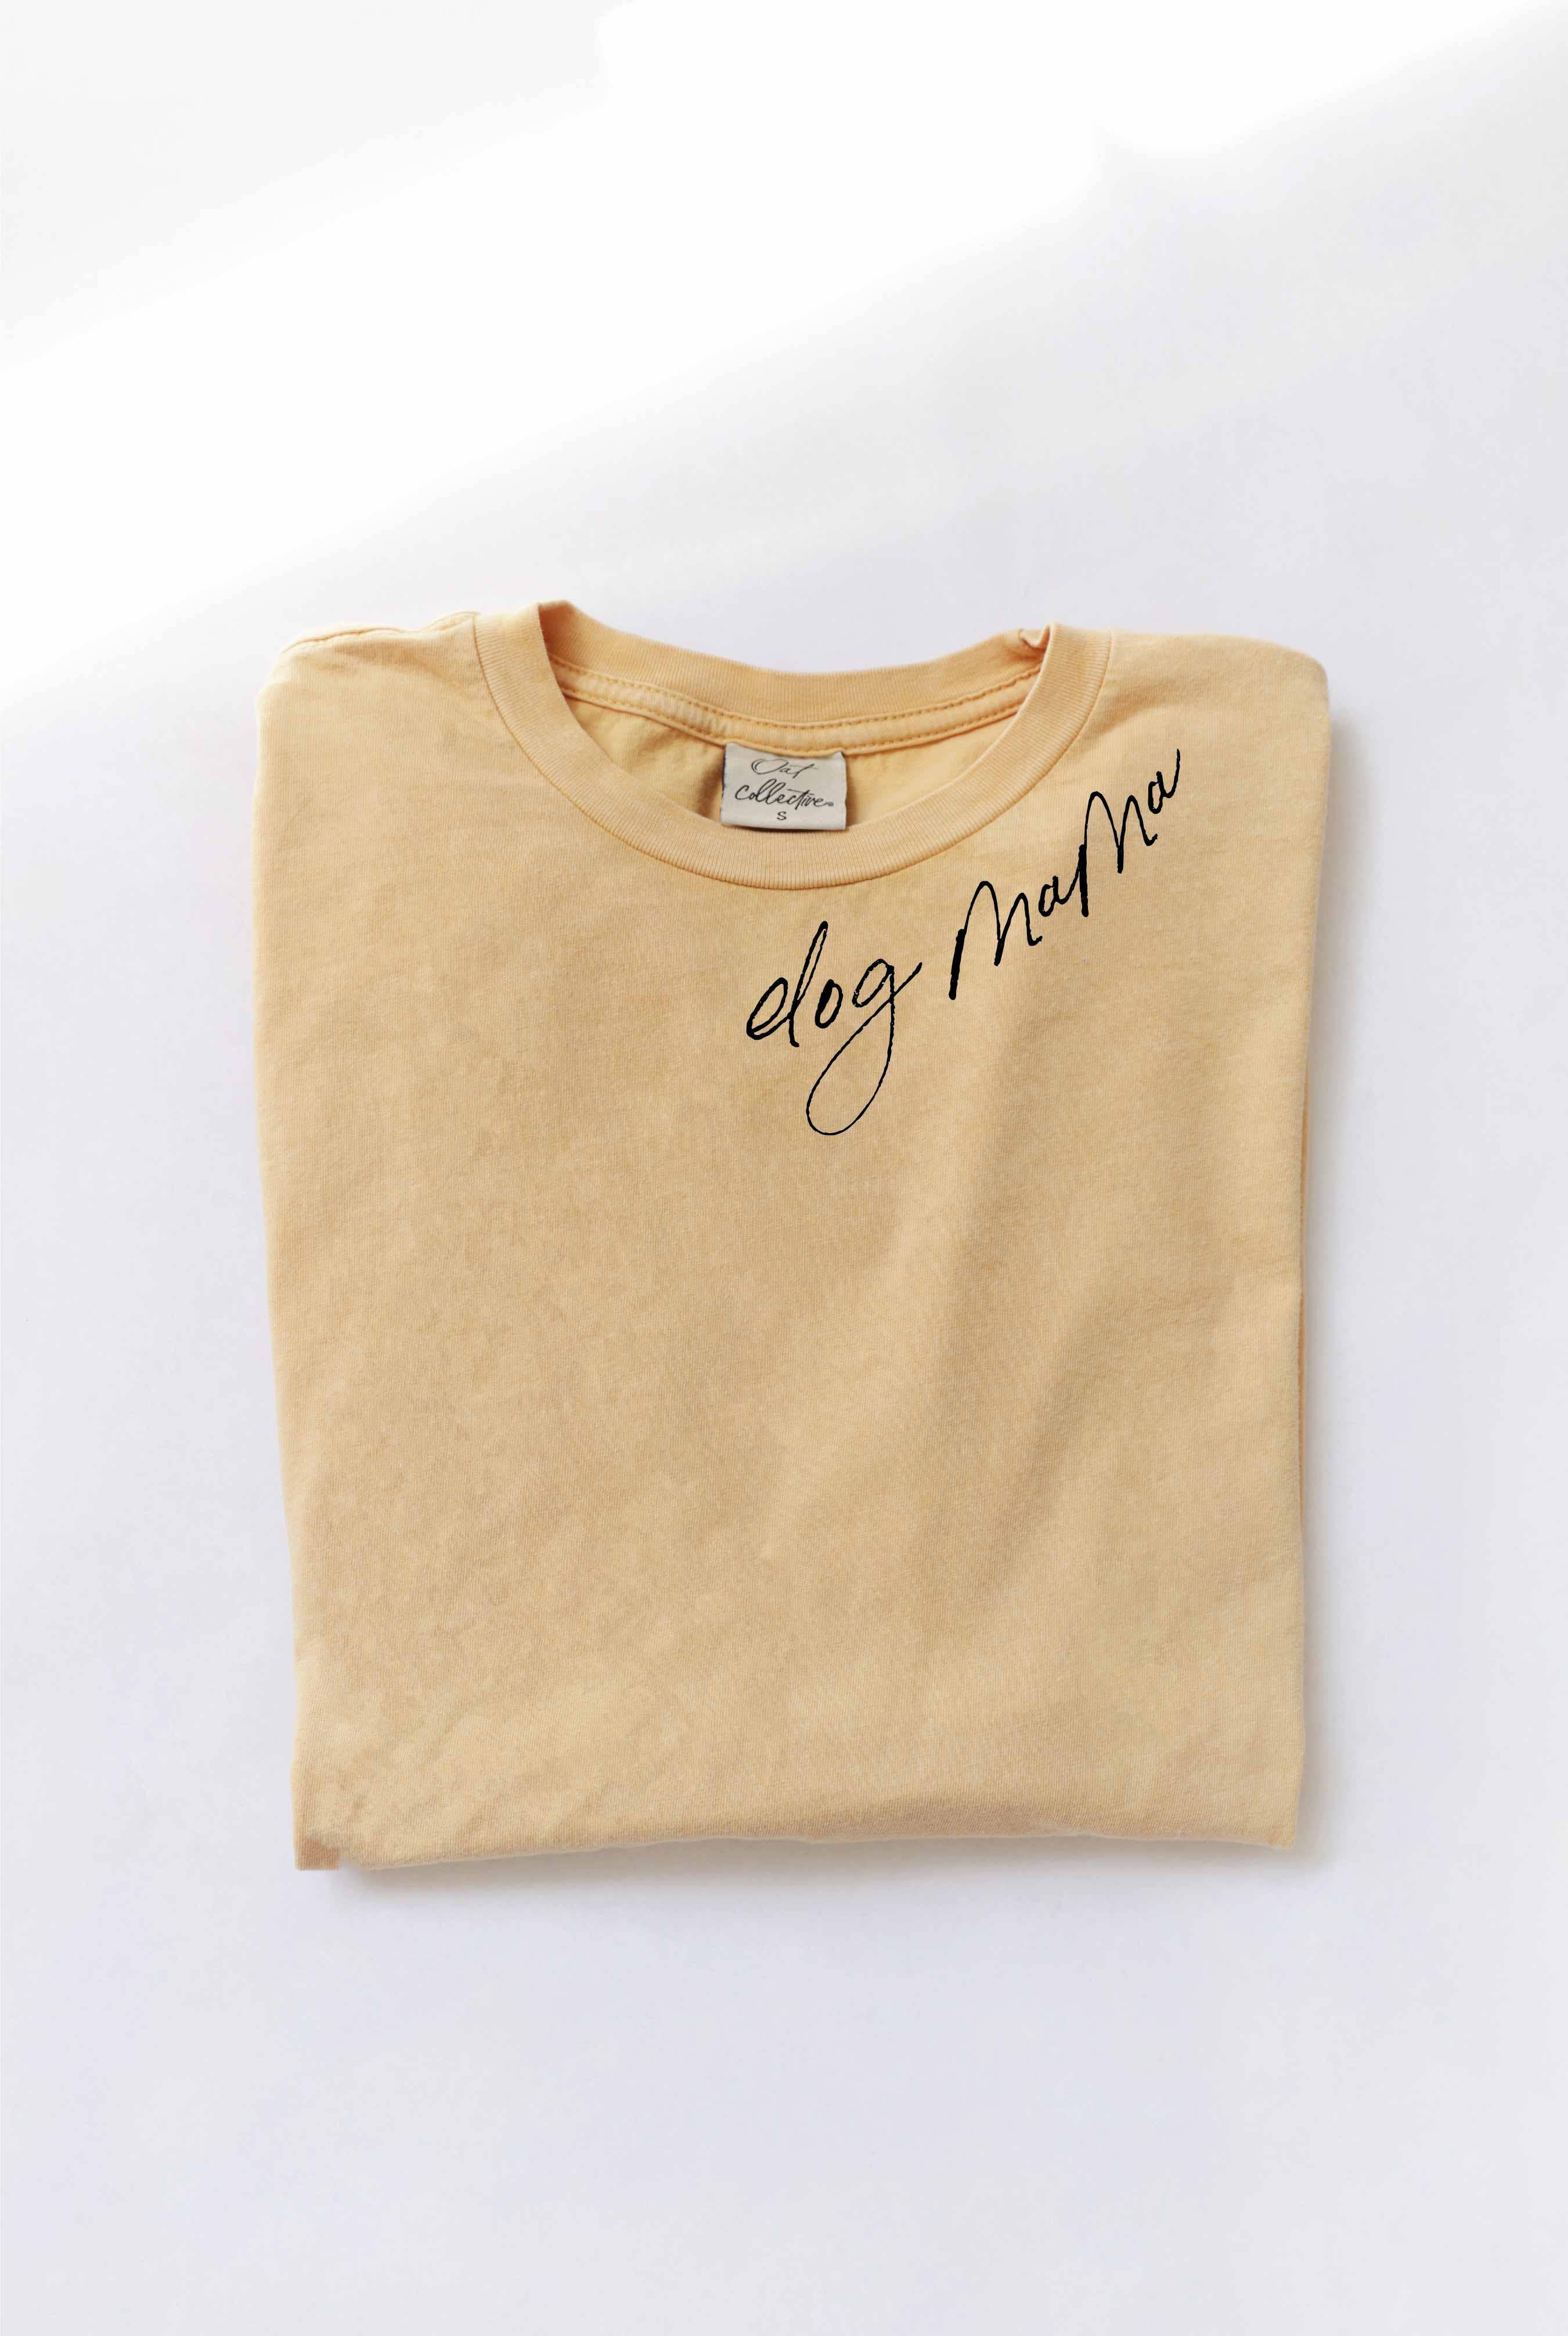 OAT COLLECTIVE - DOG MAMA Mineral Washed Graphic Top: CREAM / XL